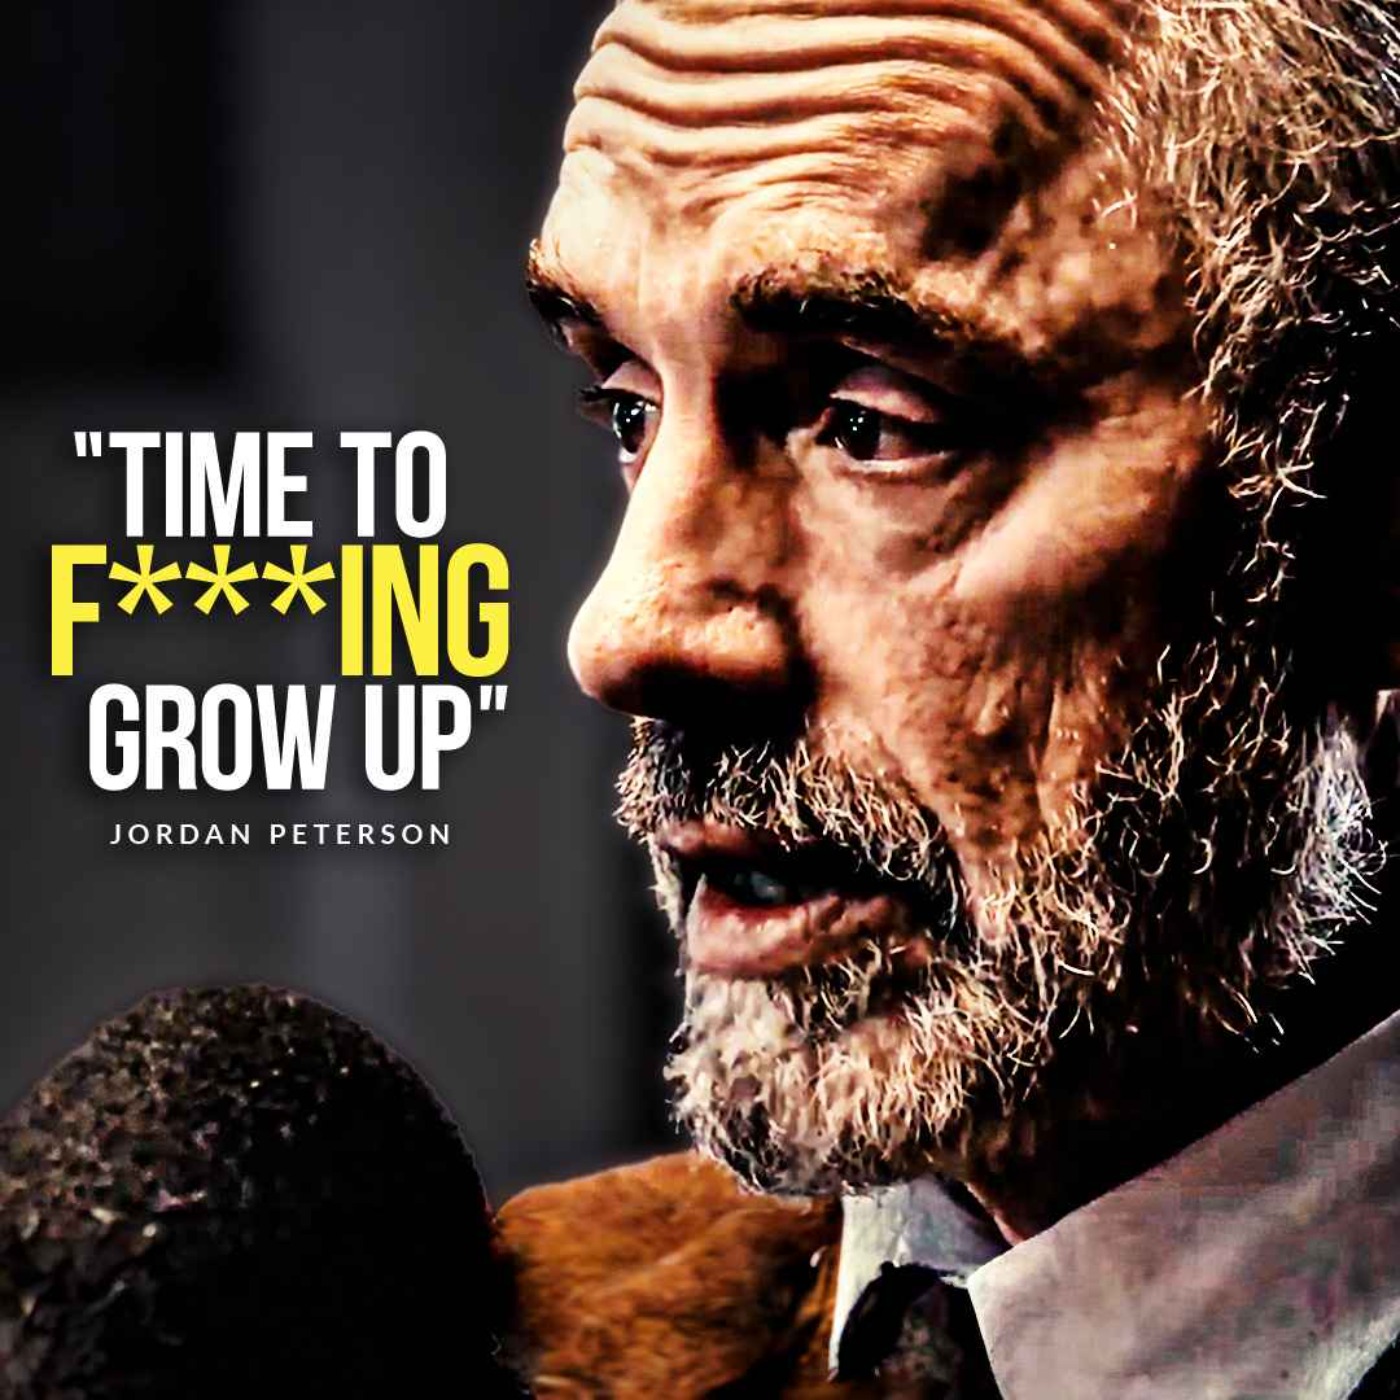 TIME TO GROW UP | Jordan Peterson’s Life Advice Will Change Your Future (MUST LISTEN)